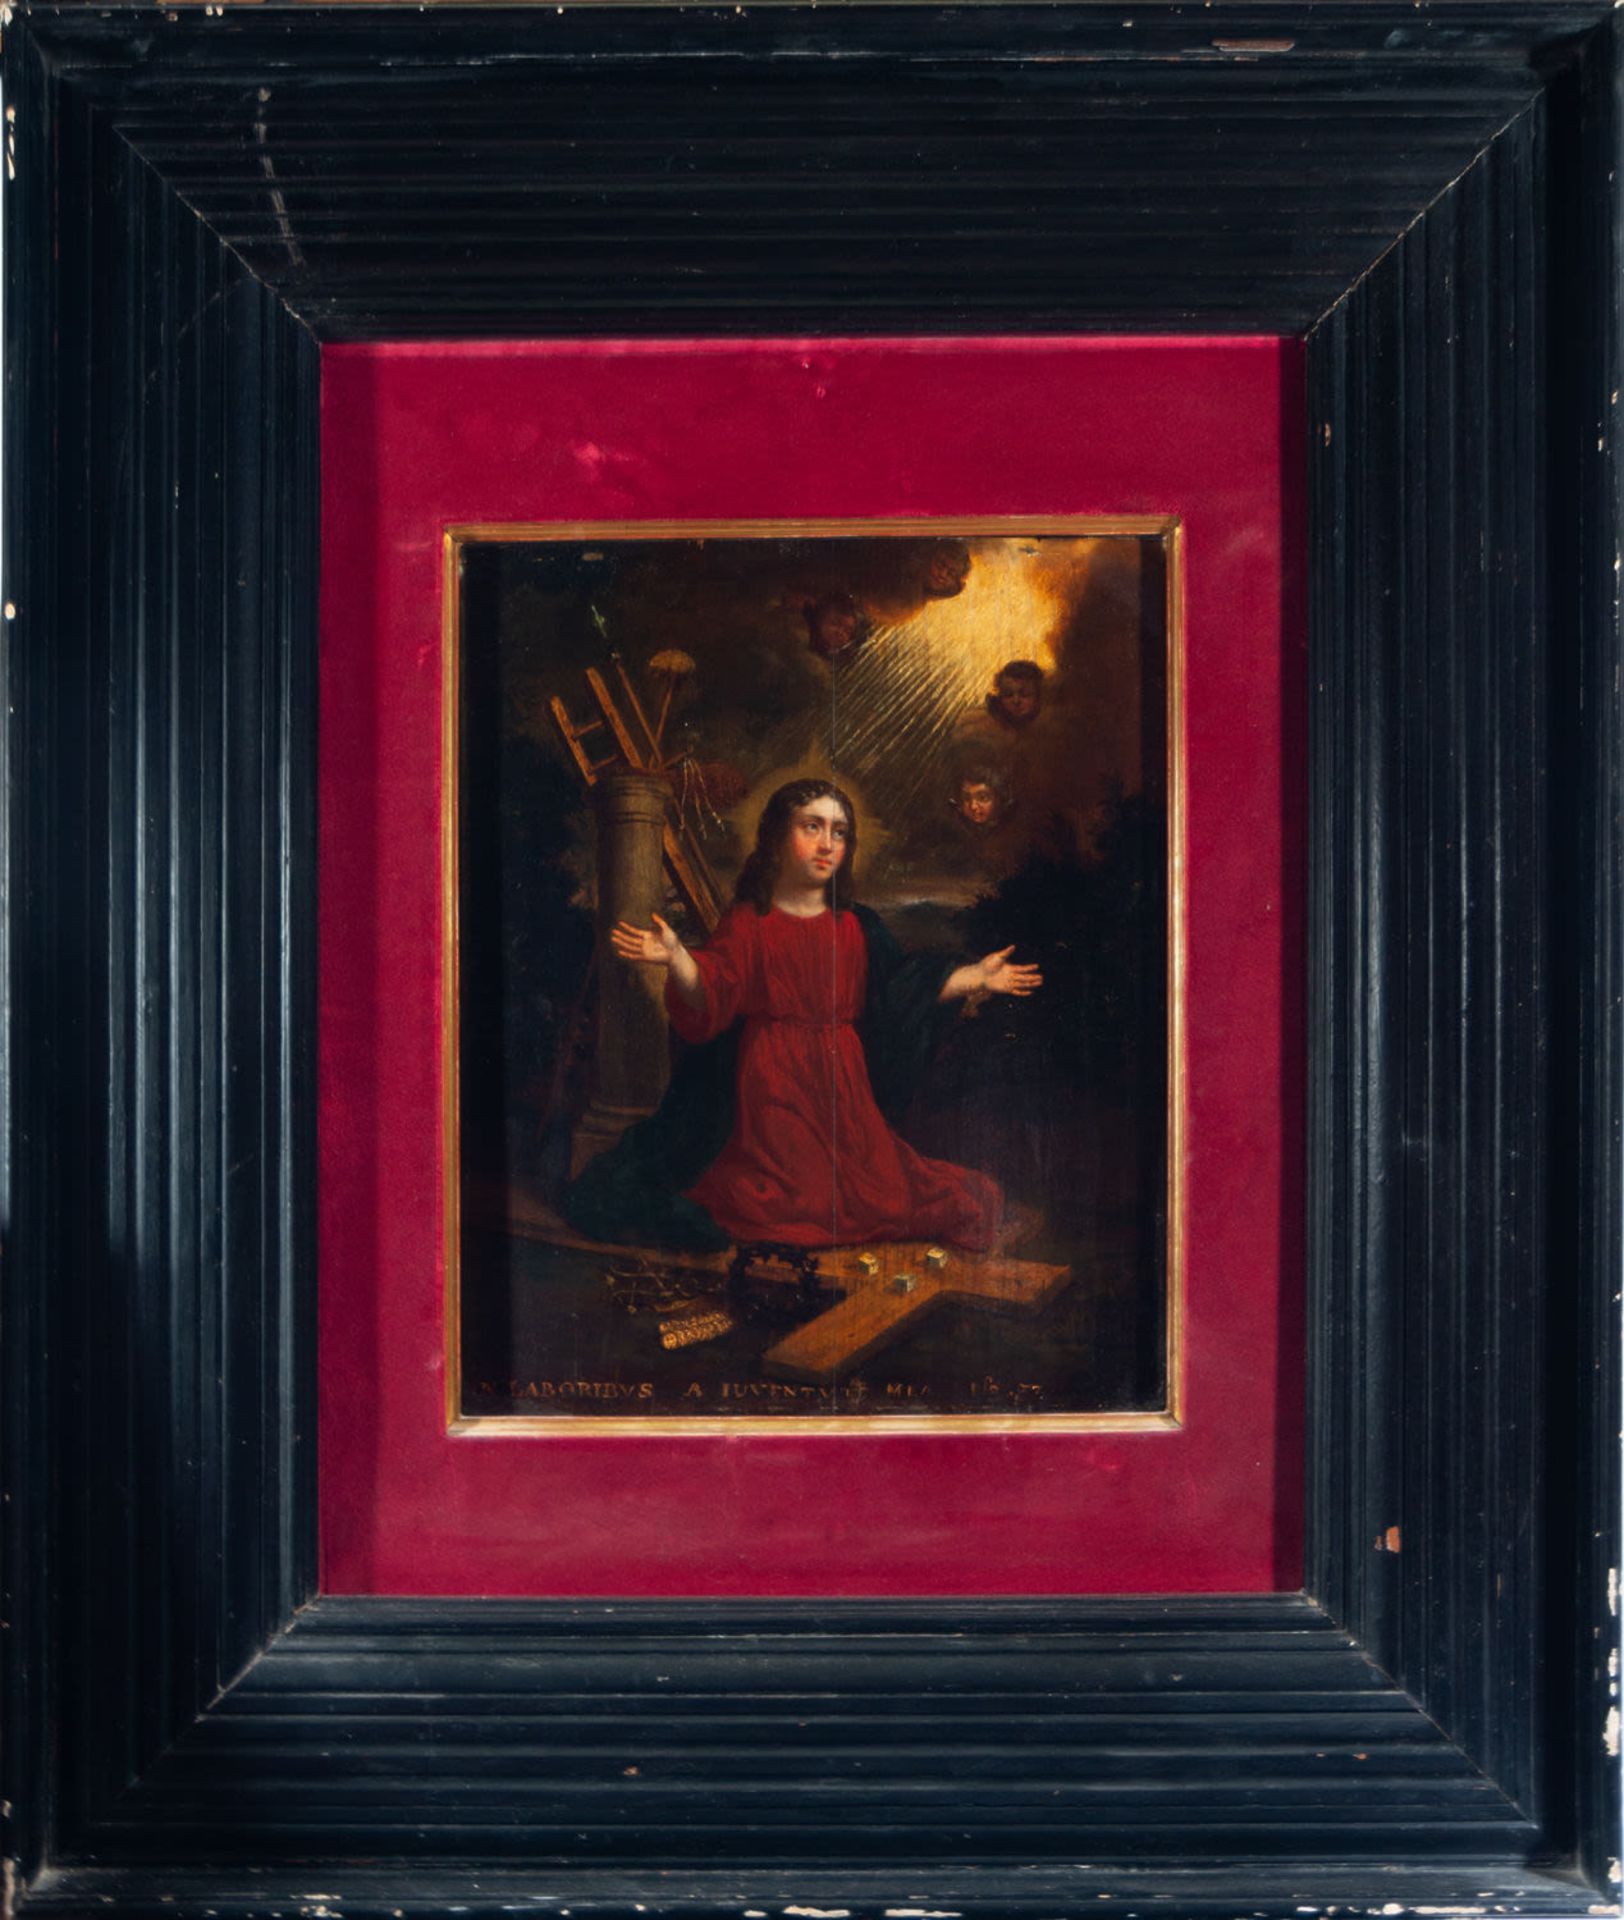 Enfant Jesus of the Passion, Italo-Flemish school from the 16th century